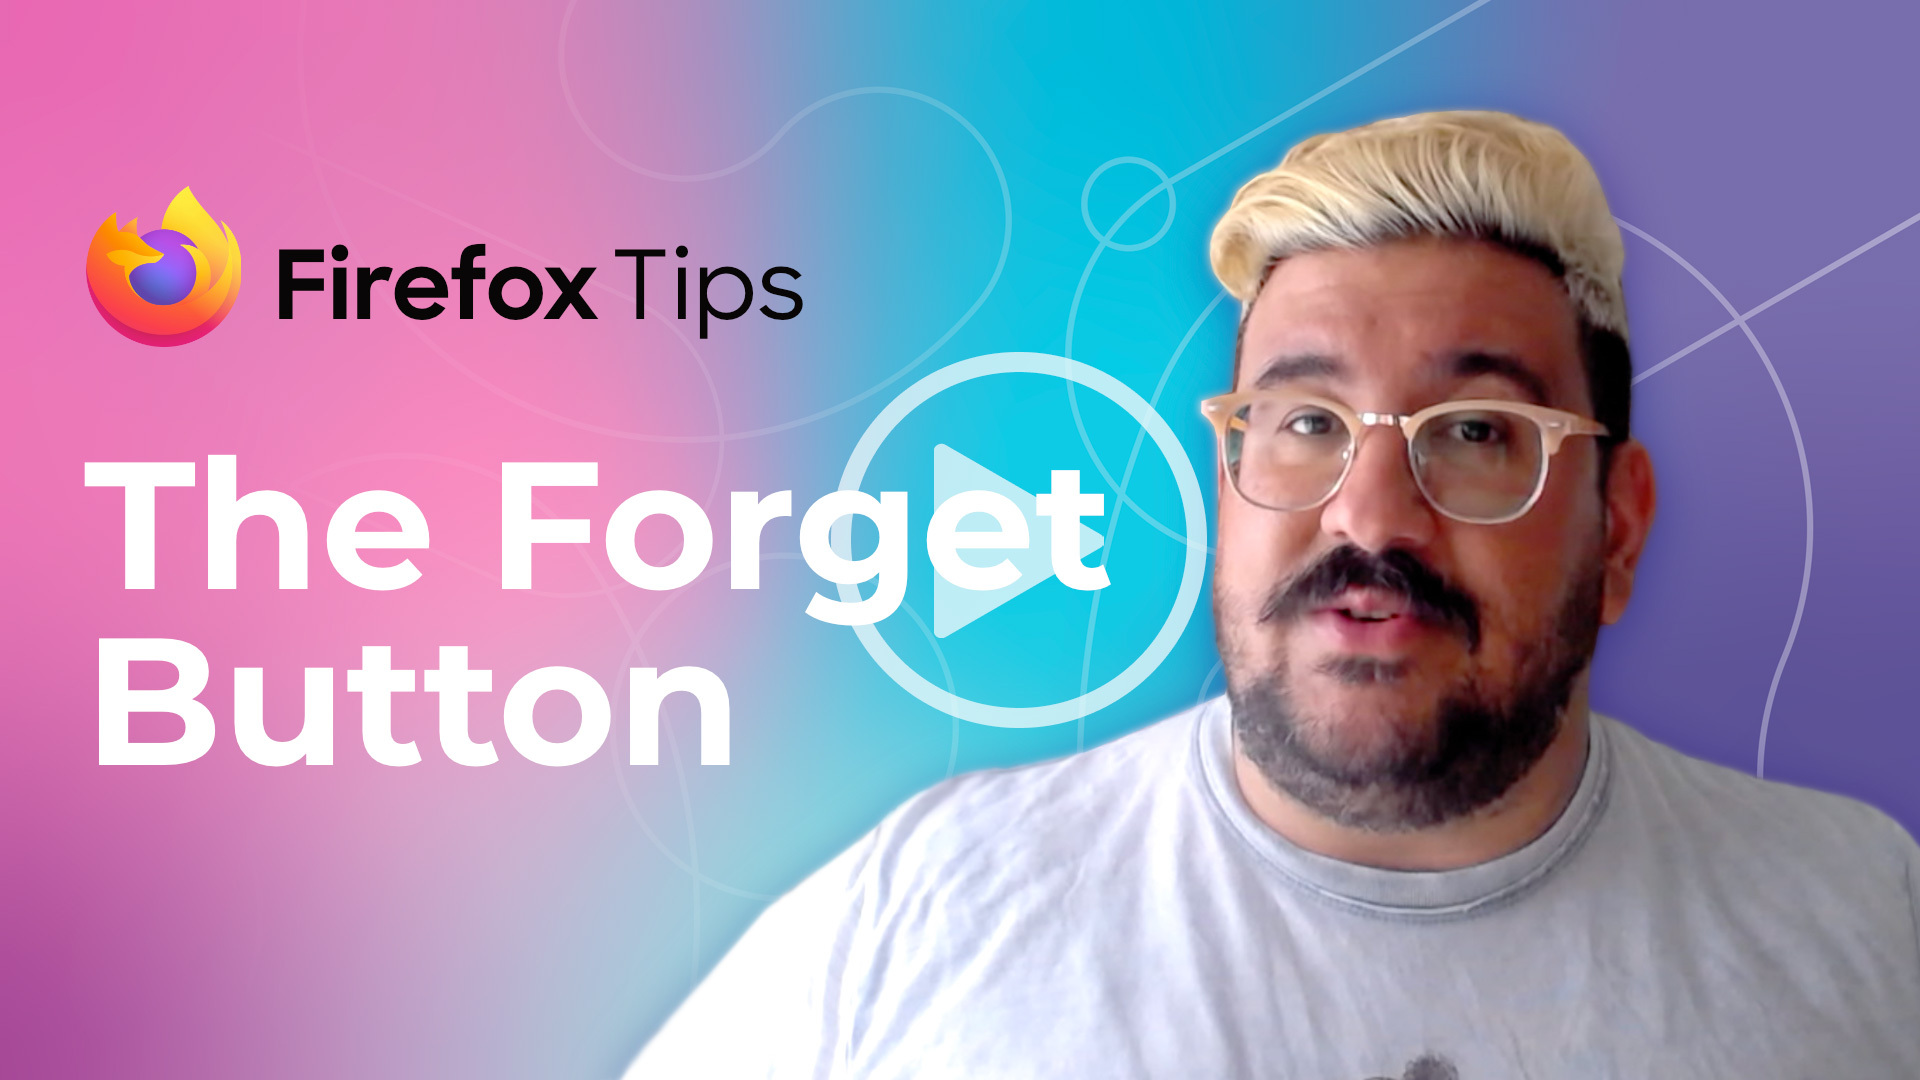 Our favorite Firefox life-hacks: Part 3: the Forget Button